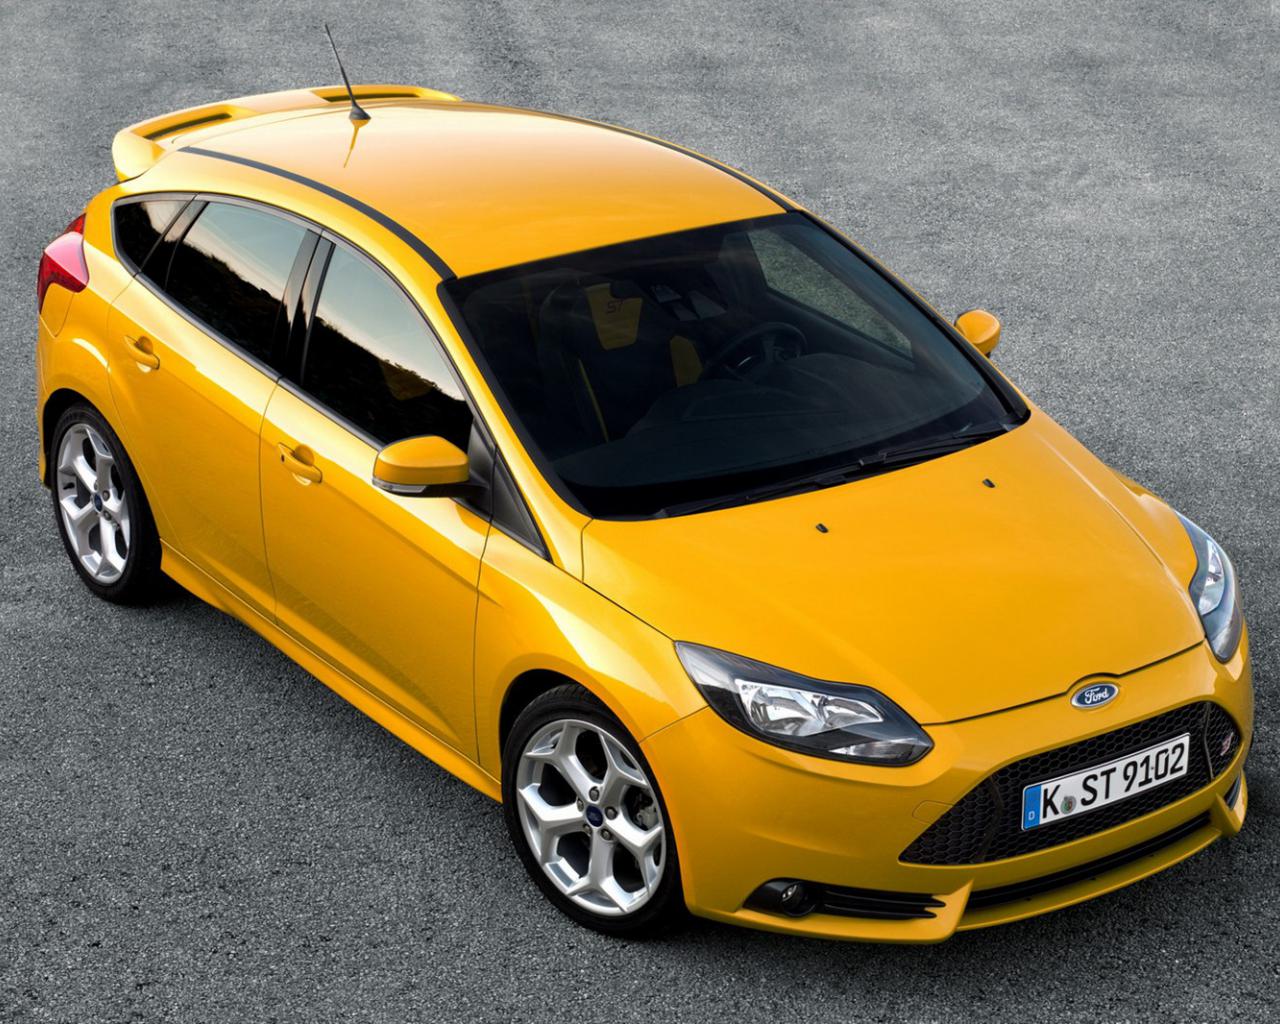 Ford Focus St - Ford Focus St South Africa - HD Wallpaper 